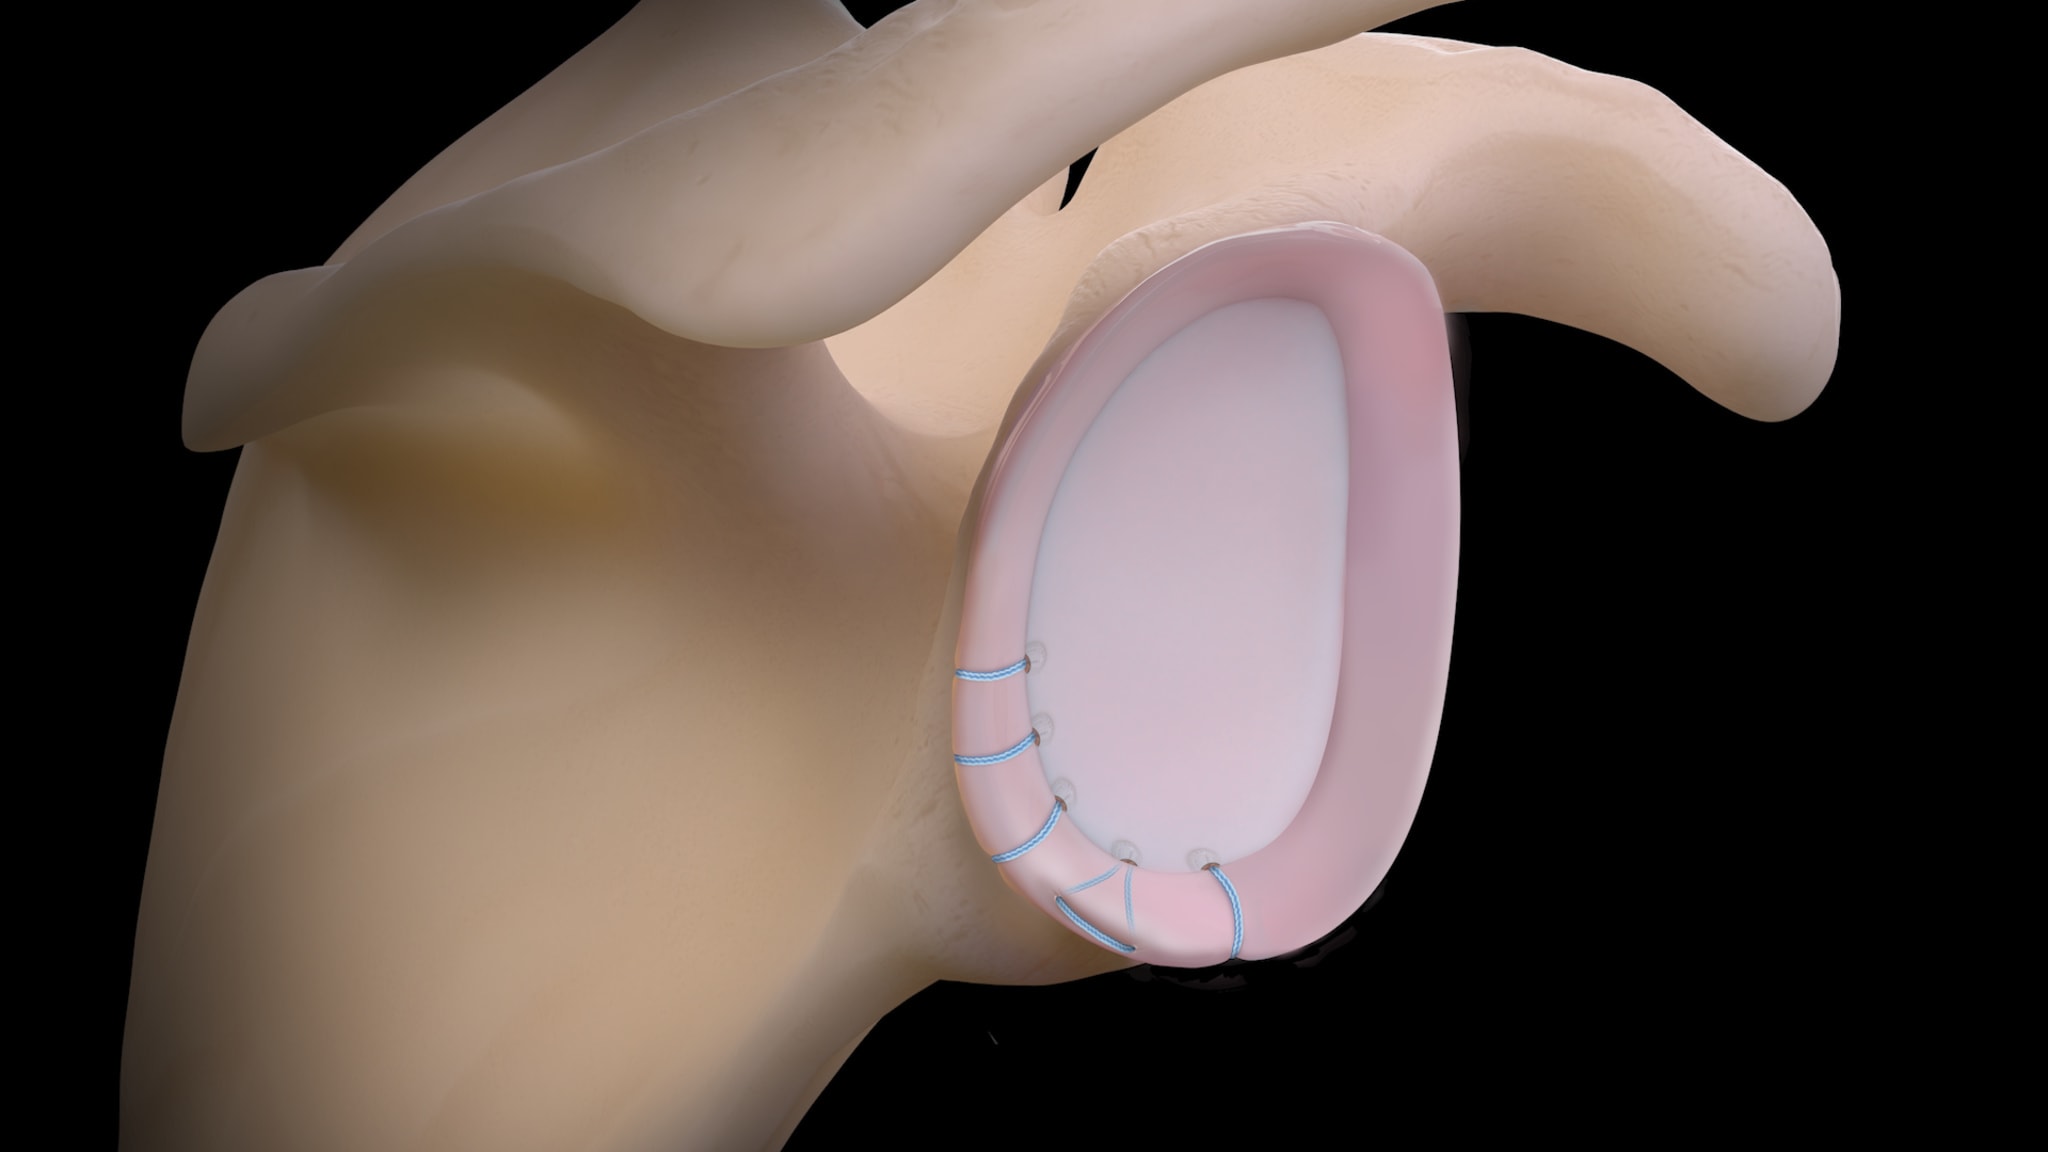 Re-Live Surgical Technique: Posterior Labral Tear Repair With Tensionable Knotless 1.8 FiberTak® Soft Anchors